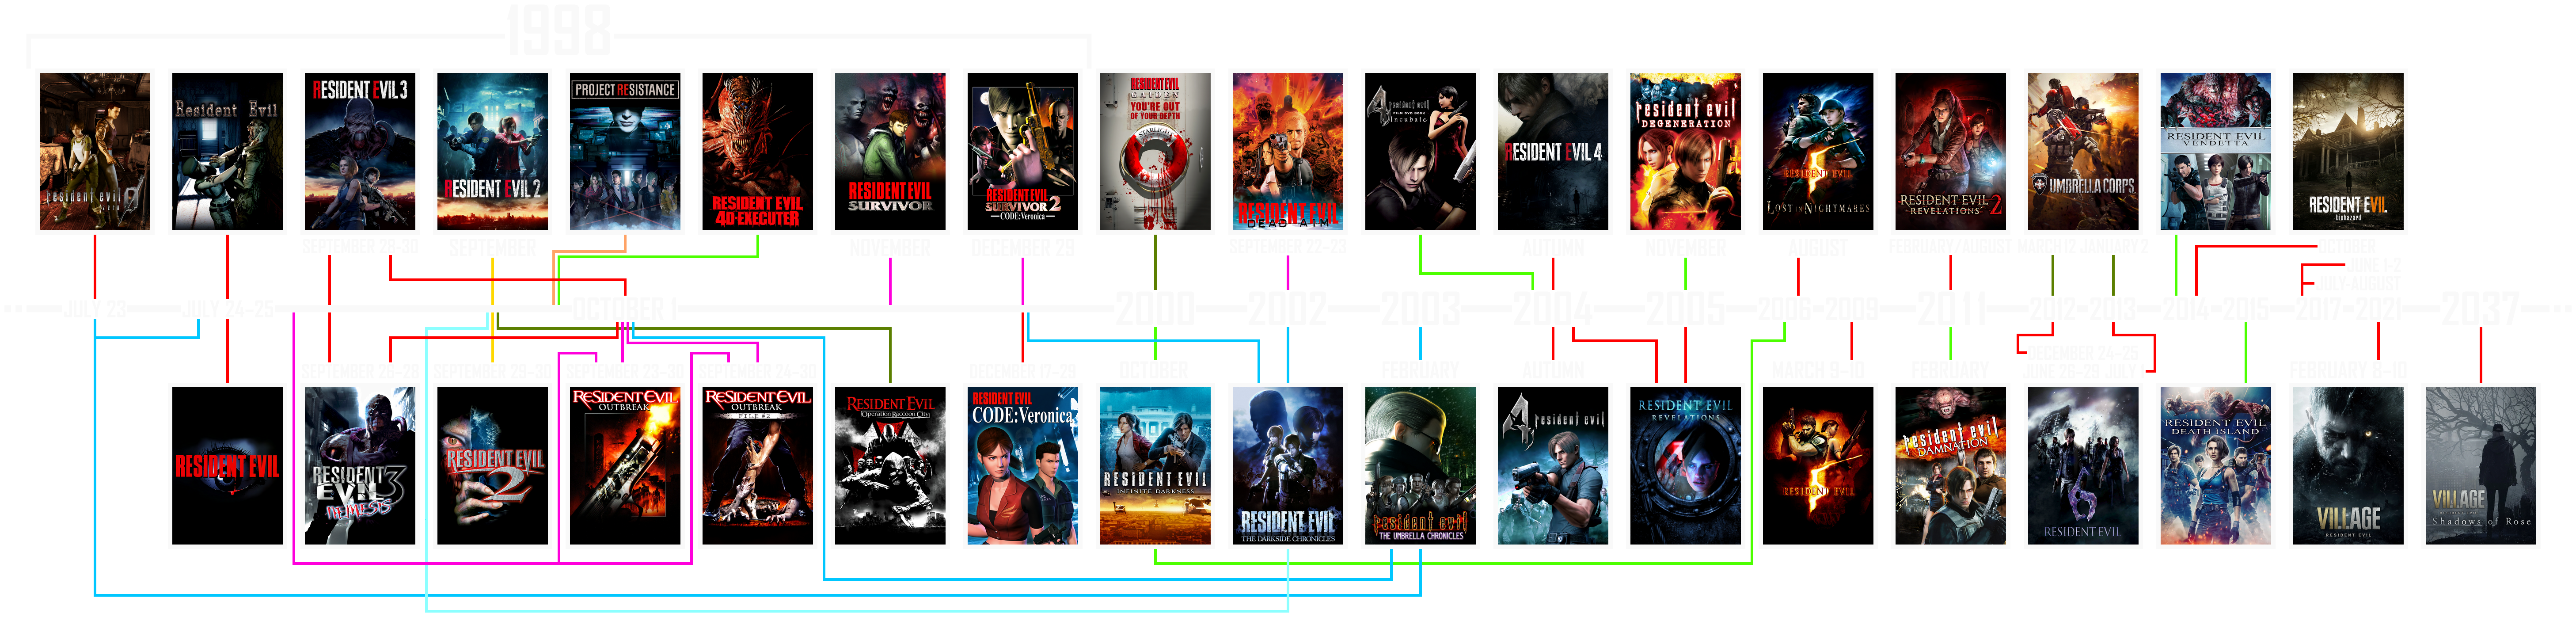 Resident Evil timeline in order - how to watch and play